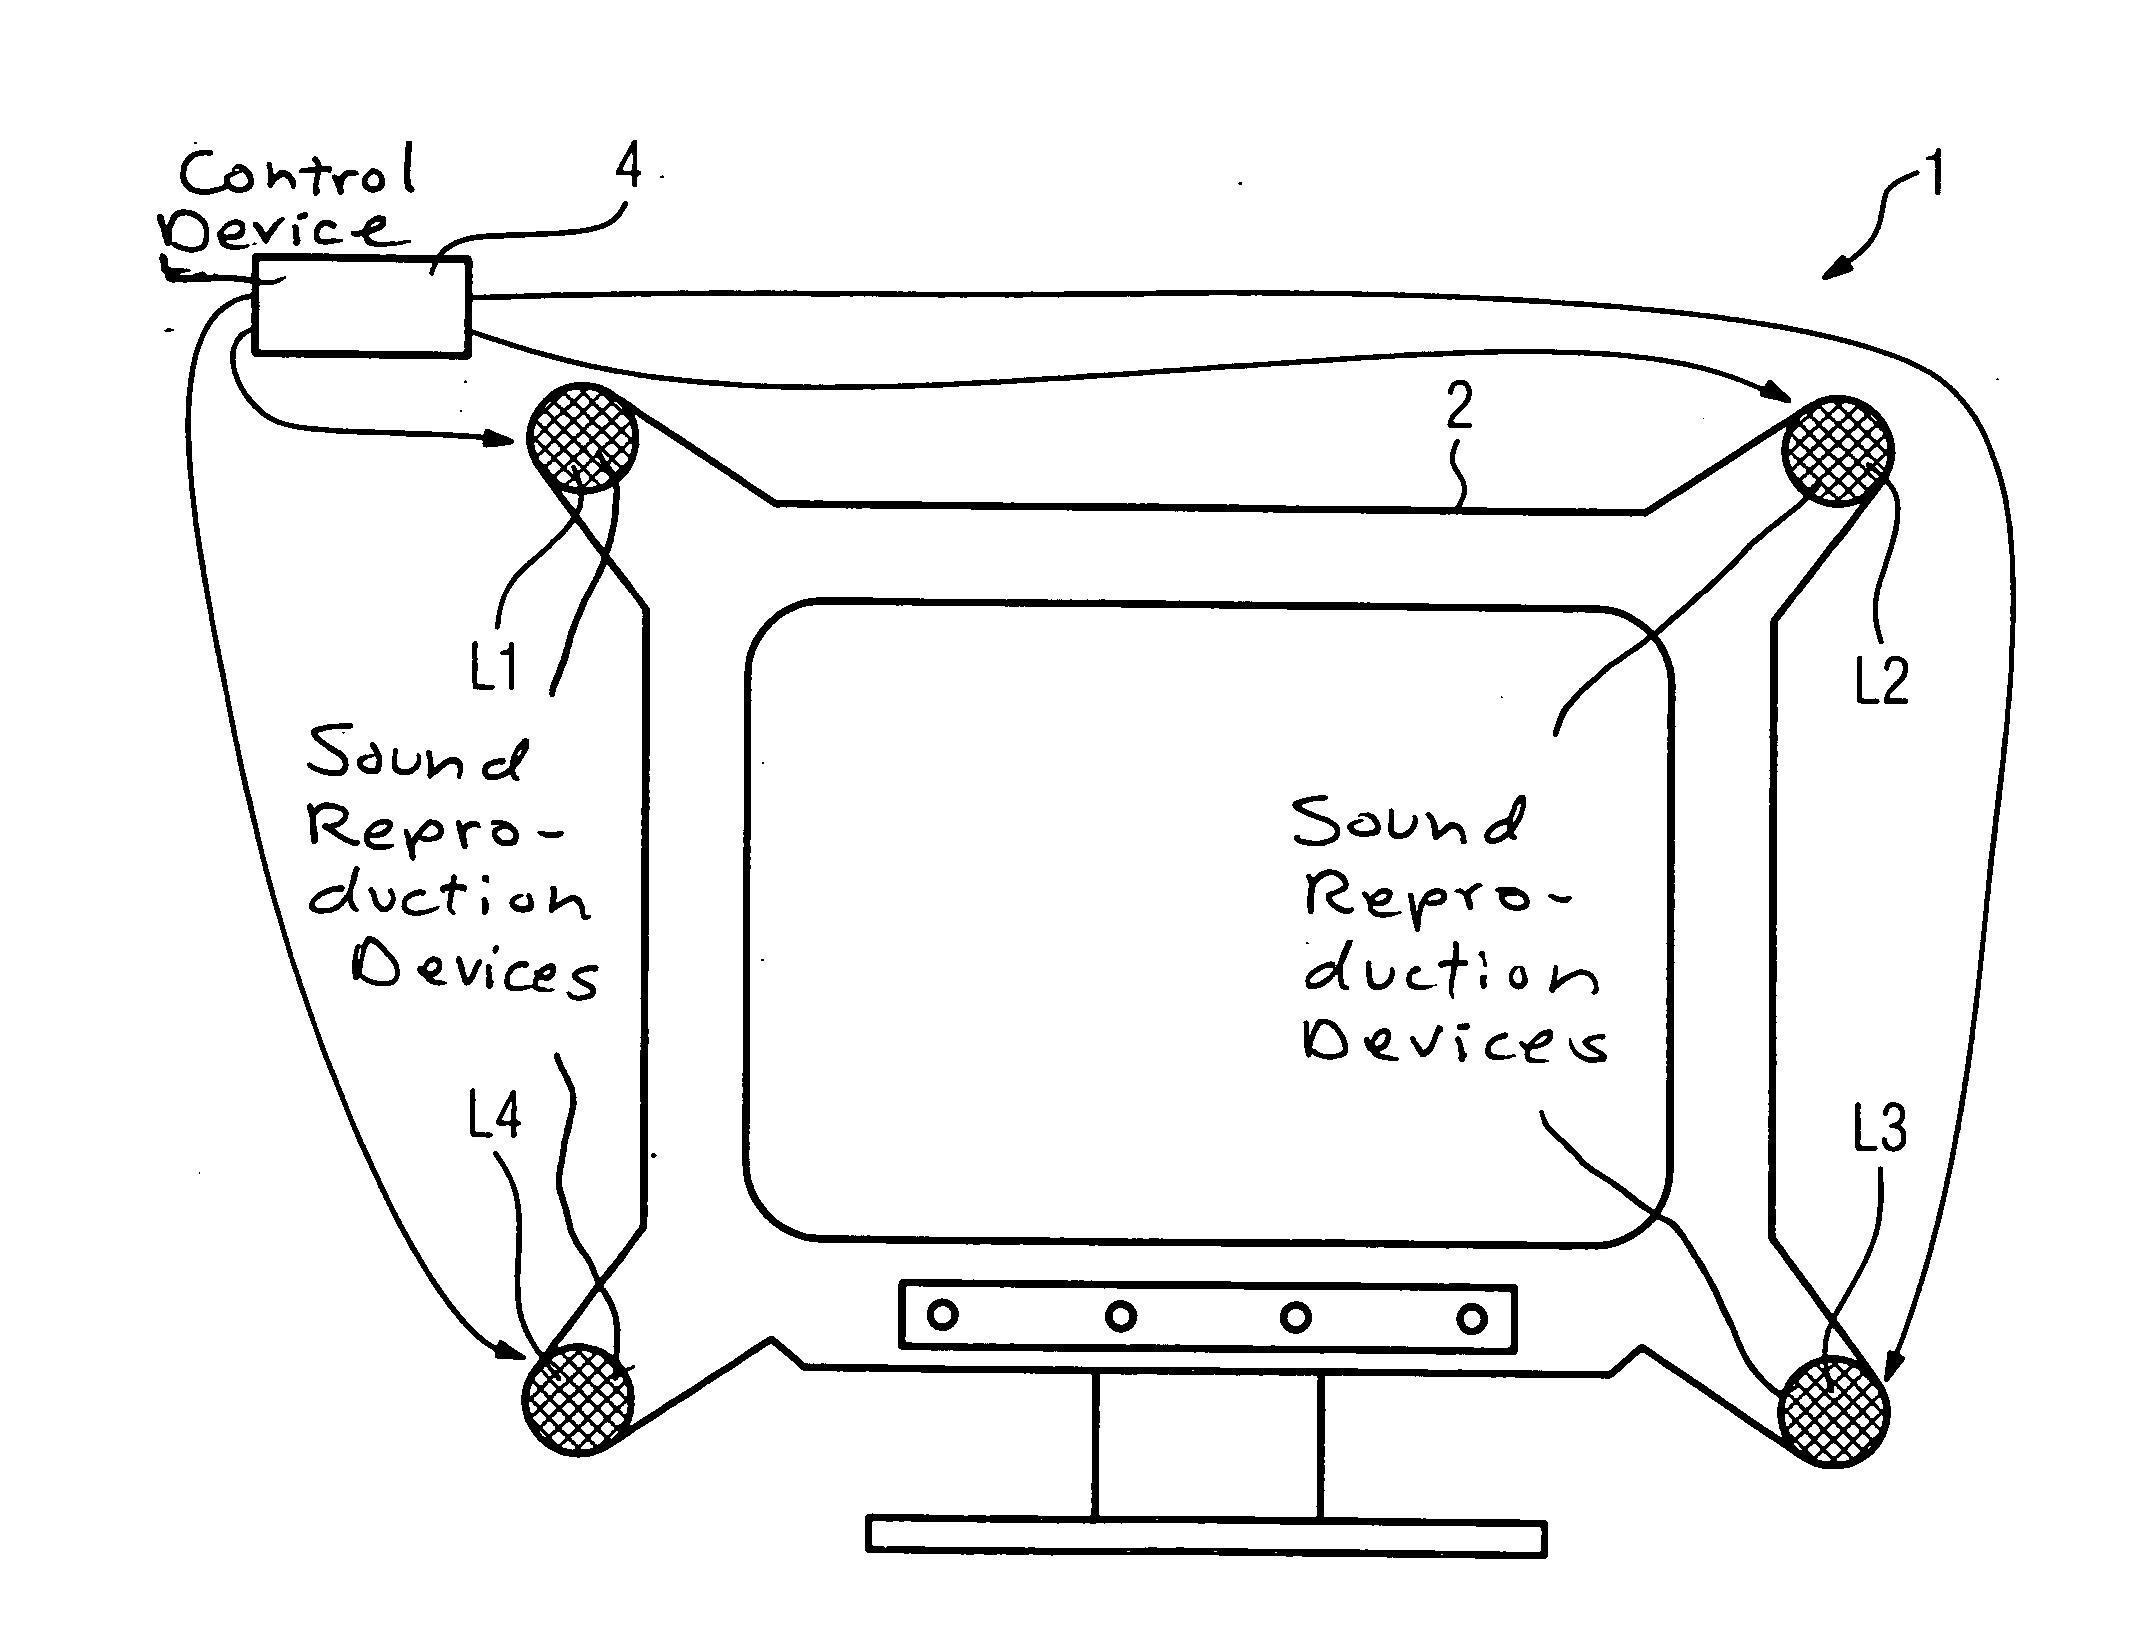 Reproduction apparatus with audio directionality indication of the location of screen information